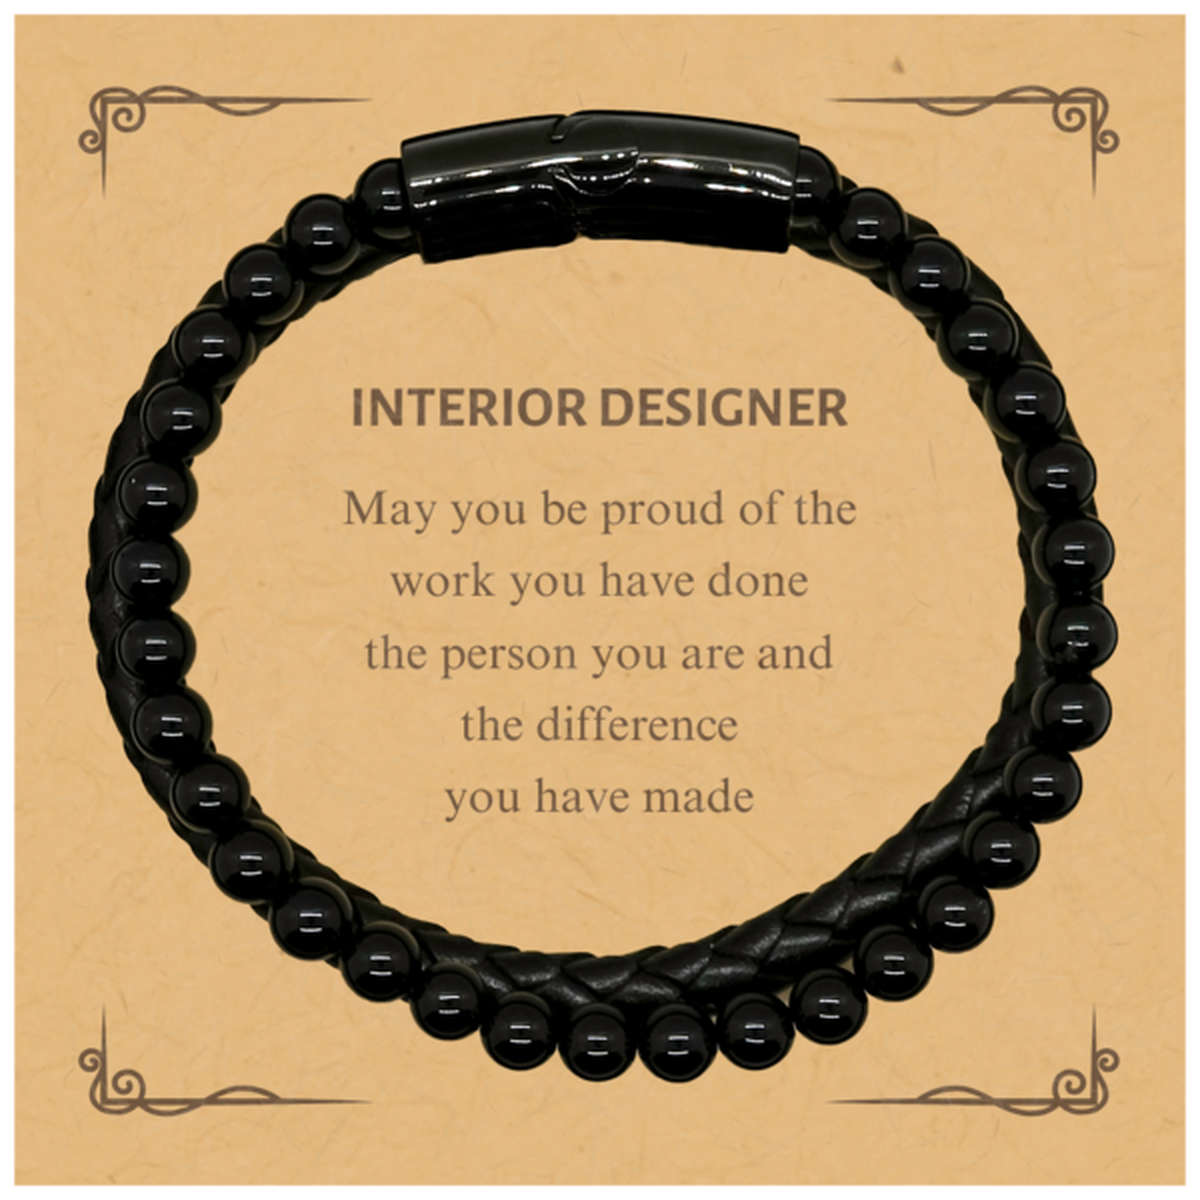 Interior Designer May you be proud of the work you have done, Retirement Interior Designer Stone Leather Bracelets for Colleague Appreciation Gifts Amazing for Interior Designer